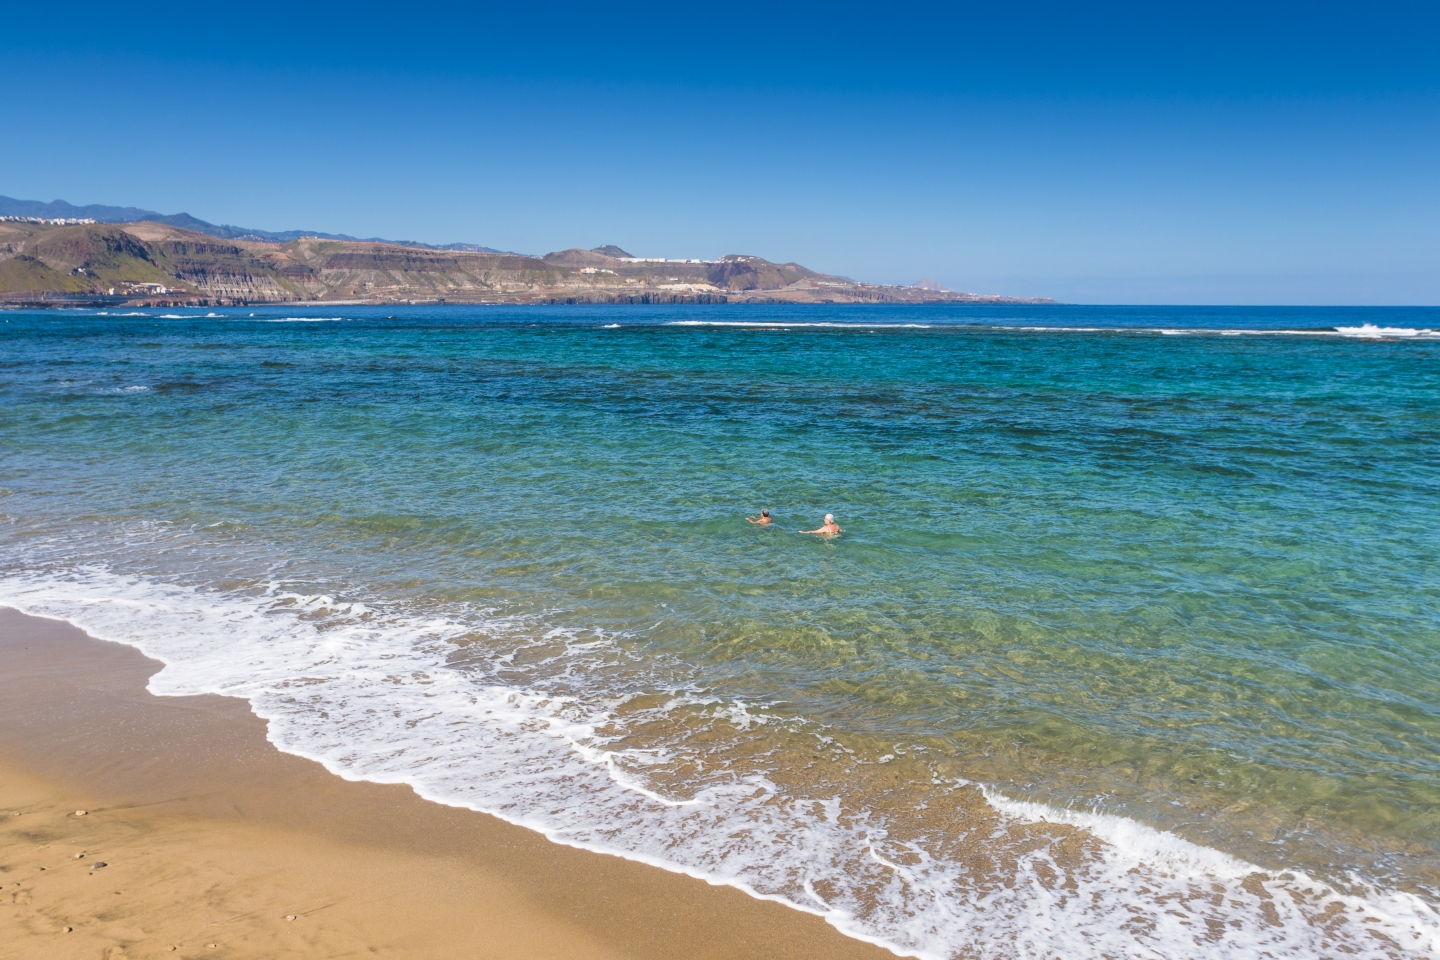 Las Canteras beach and water